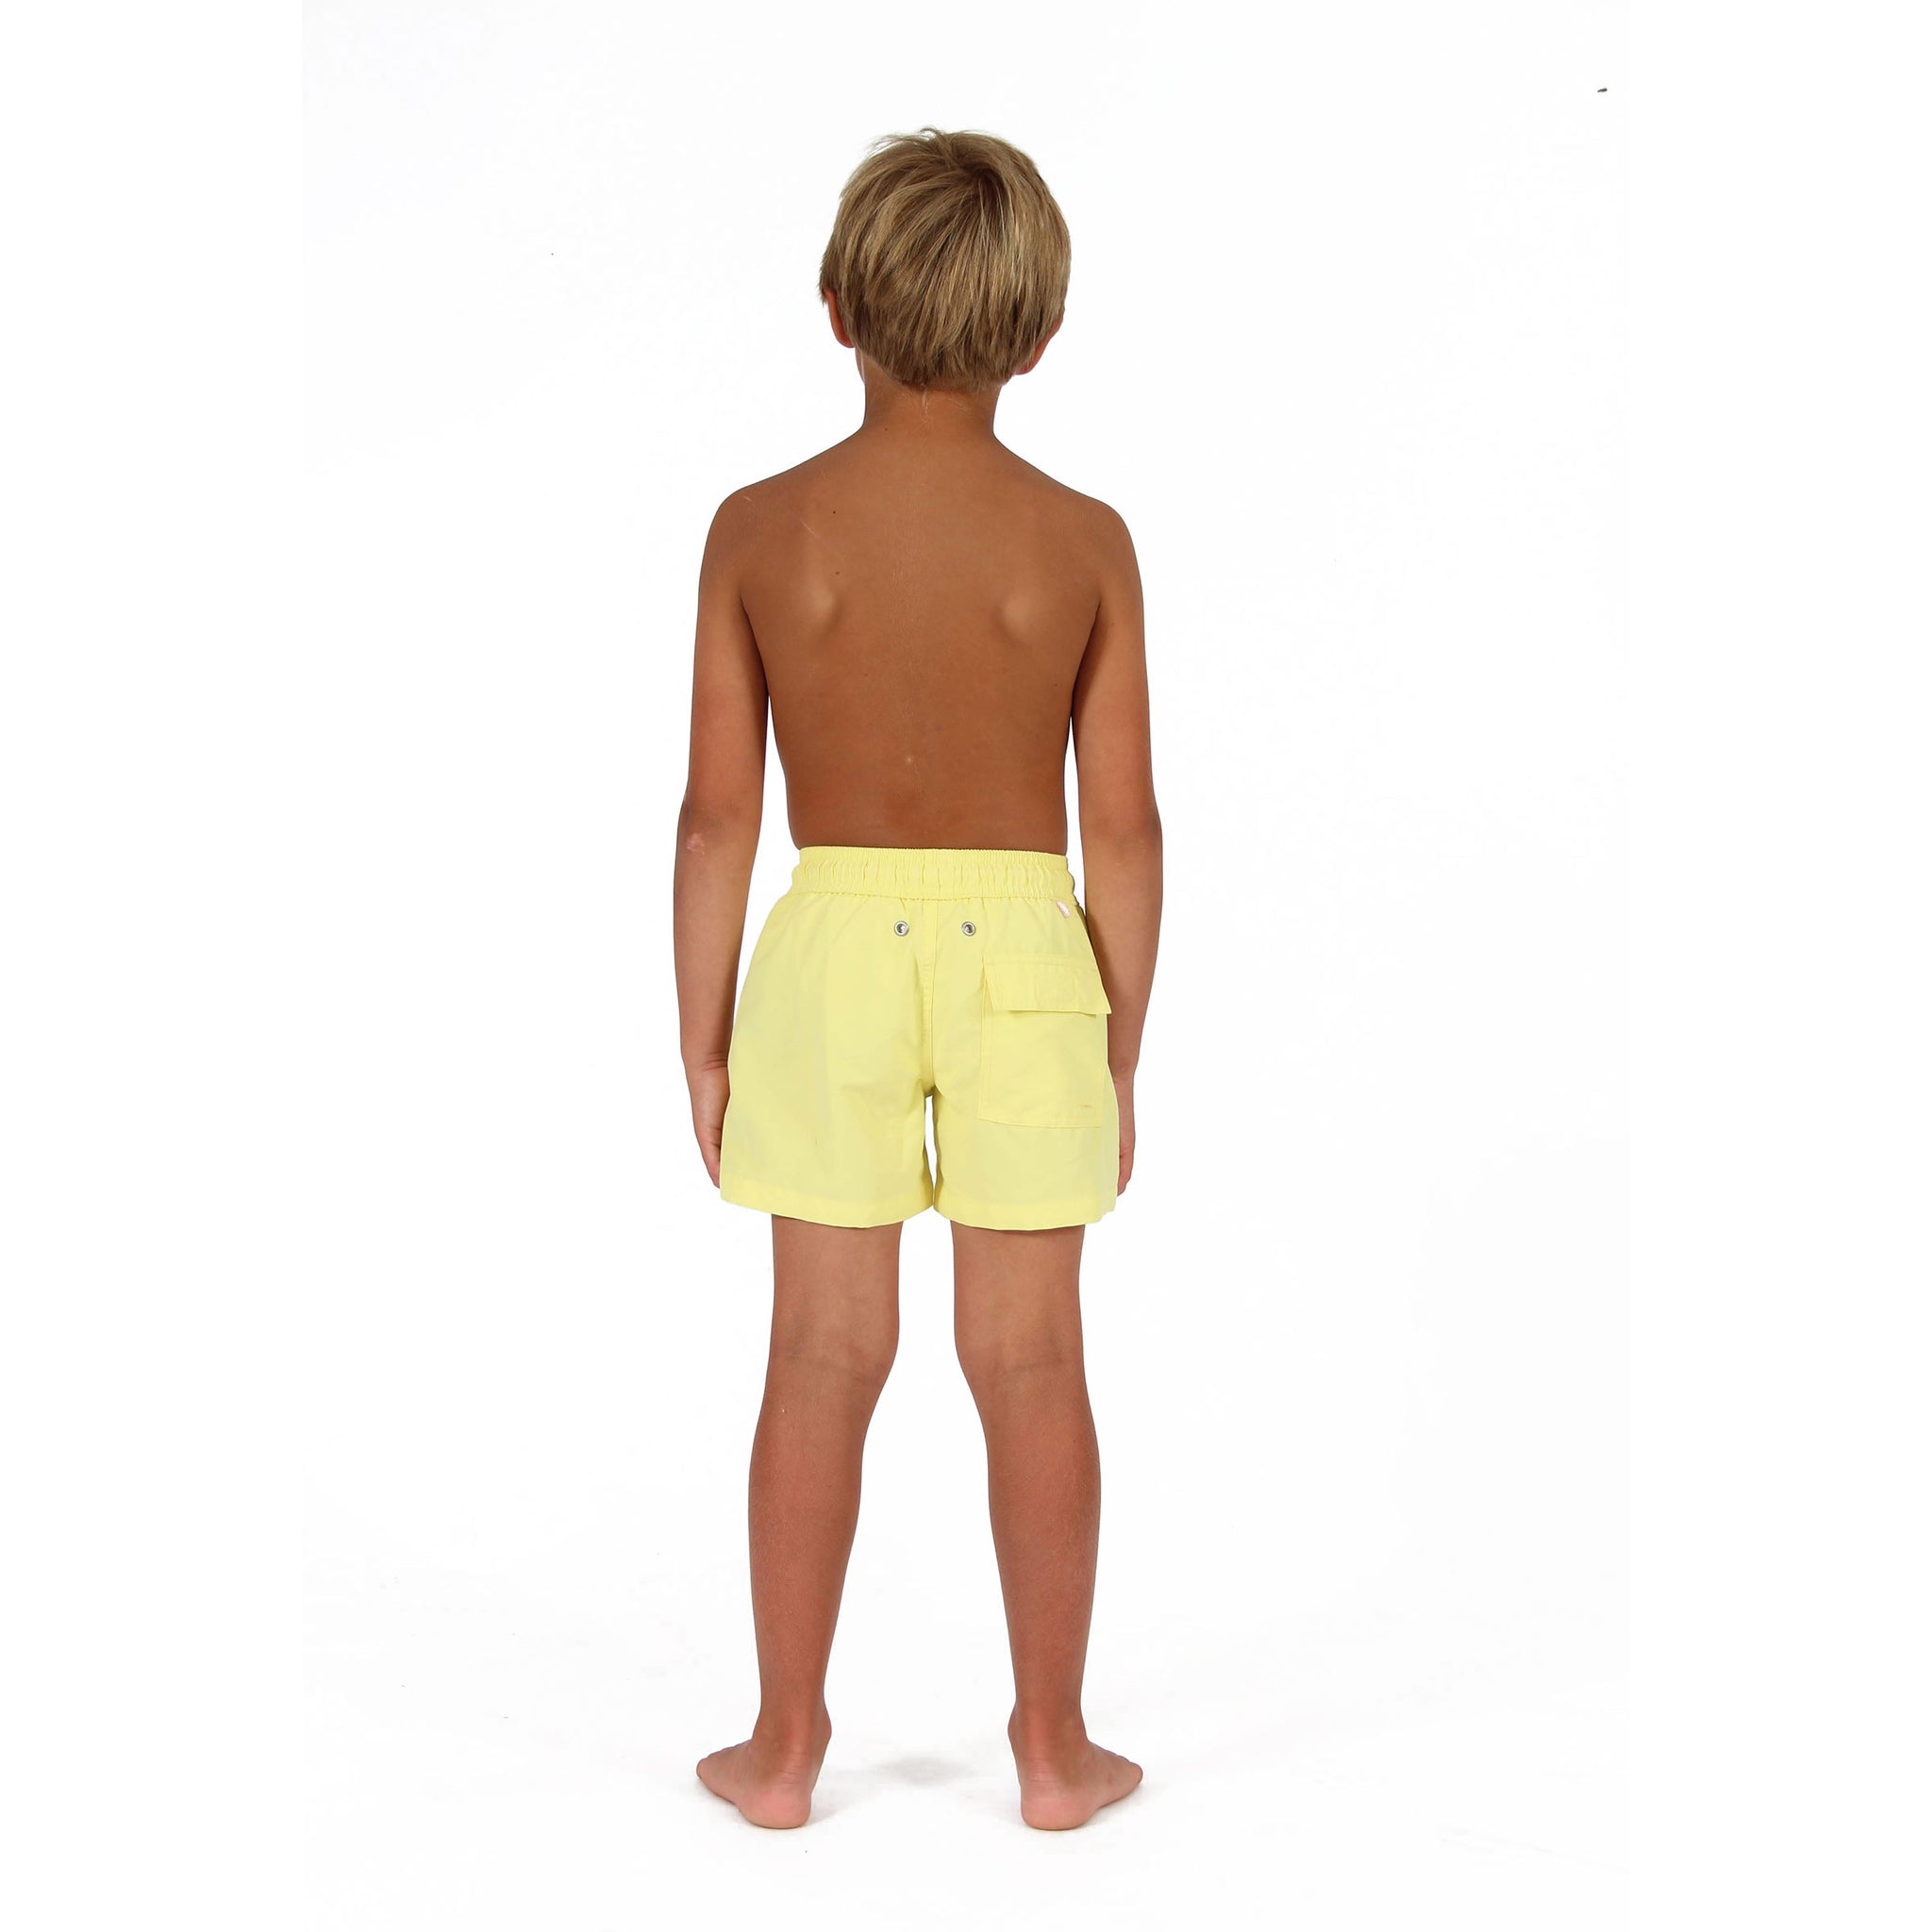 Boys swim trunks: YELLOW - Pink House Mustique